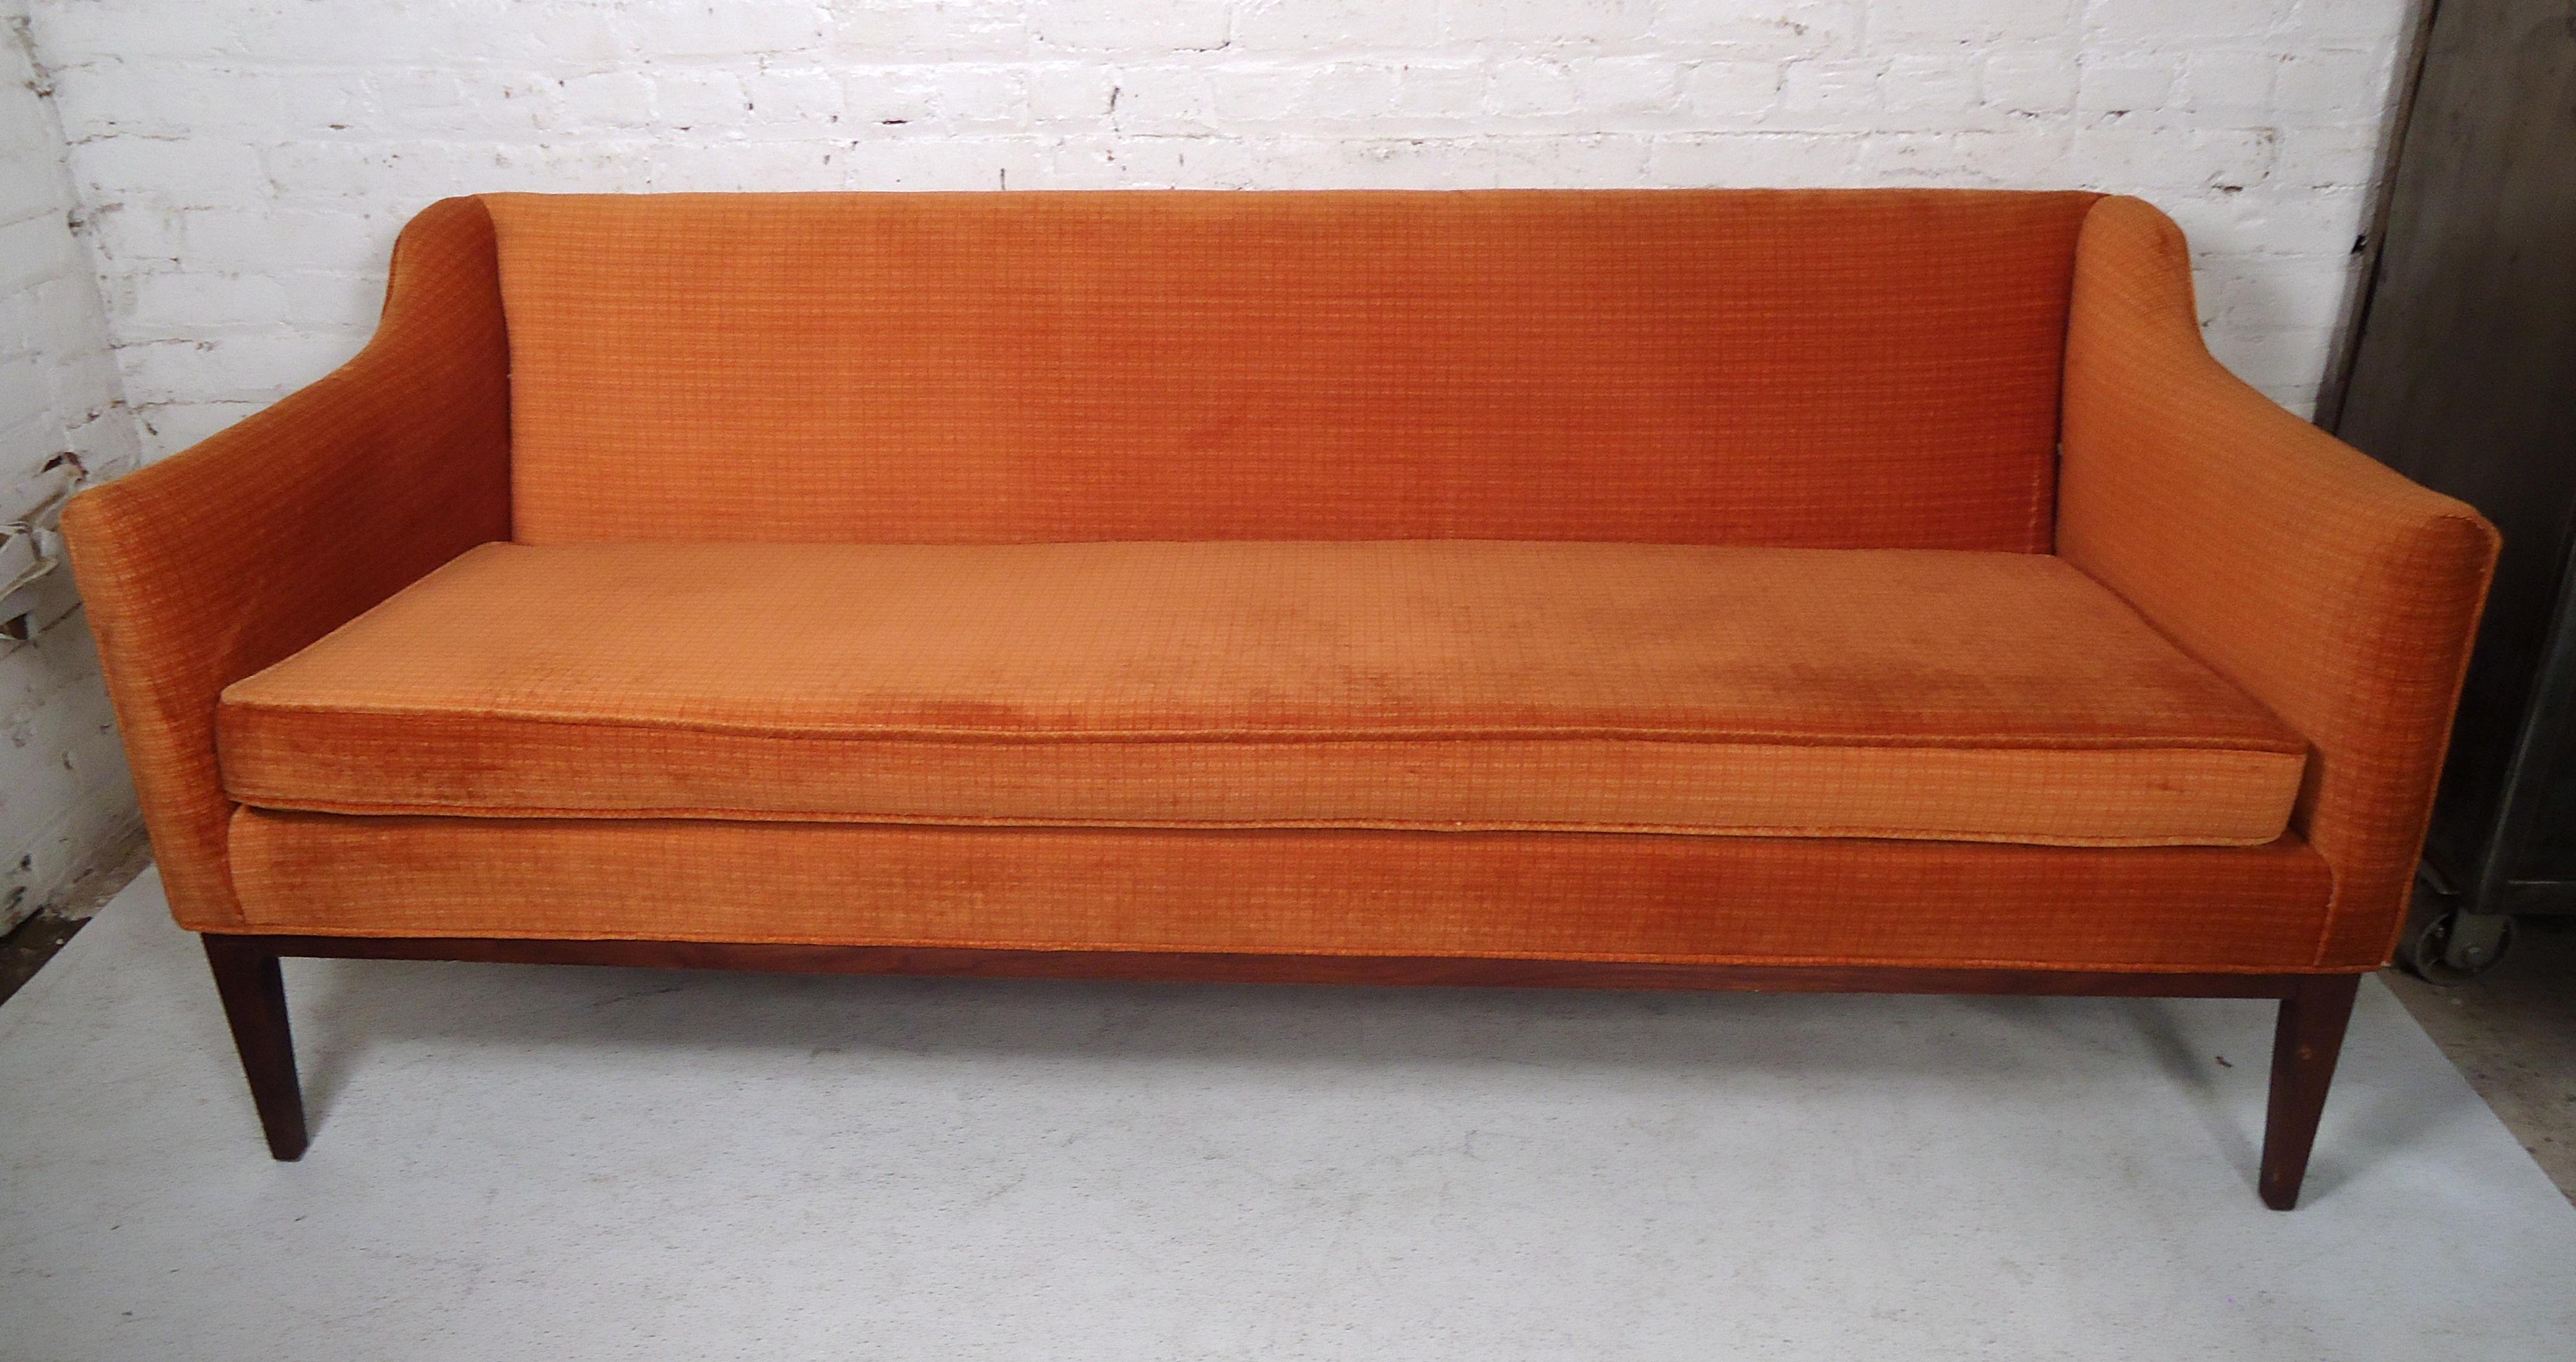 This sleek vintage modern couch features an orange upholstered body with sturdy hand-sculpted legs.
This sofa would make a great addition to any home or office.

Please confirm item location (NY or NJ).